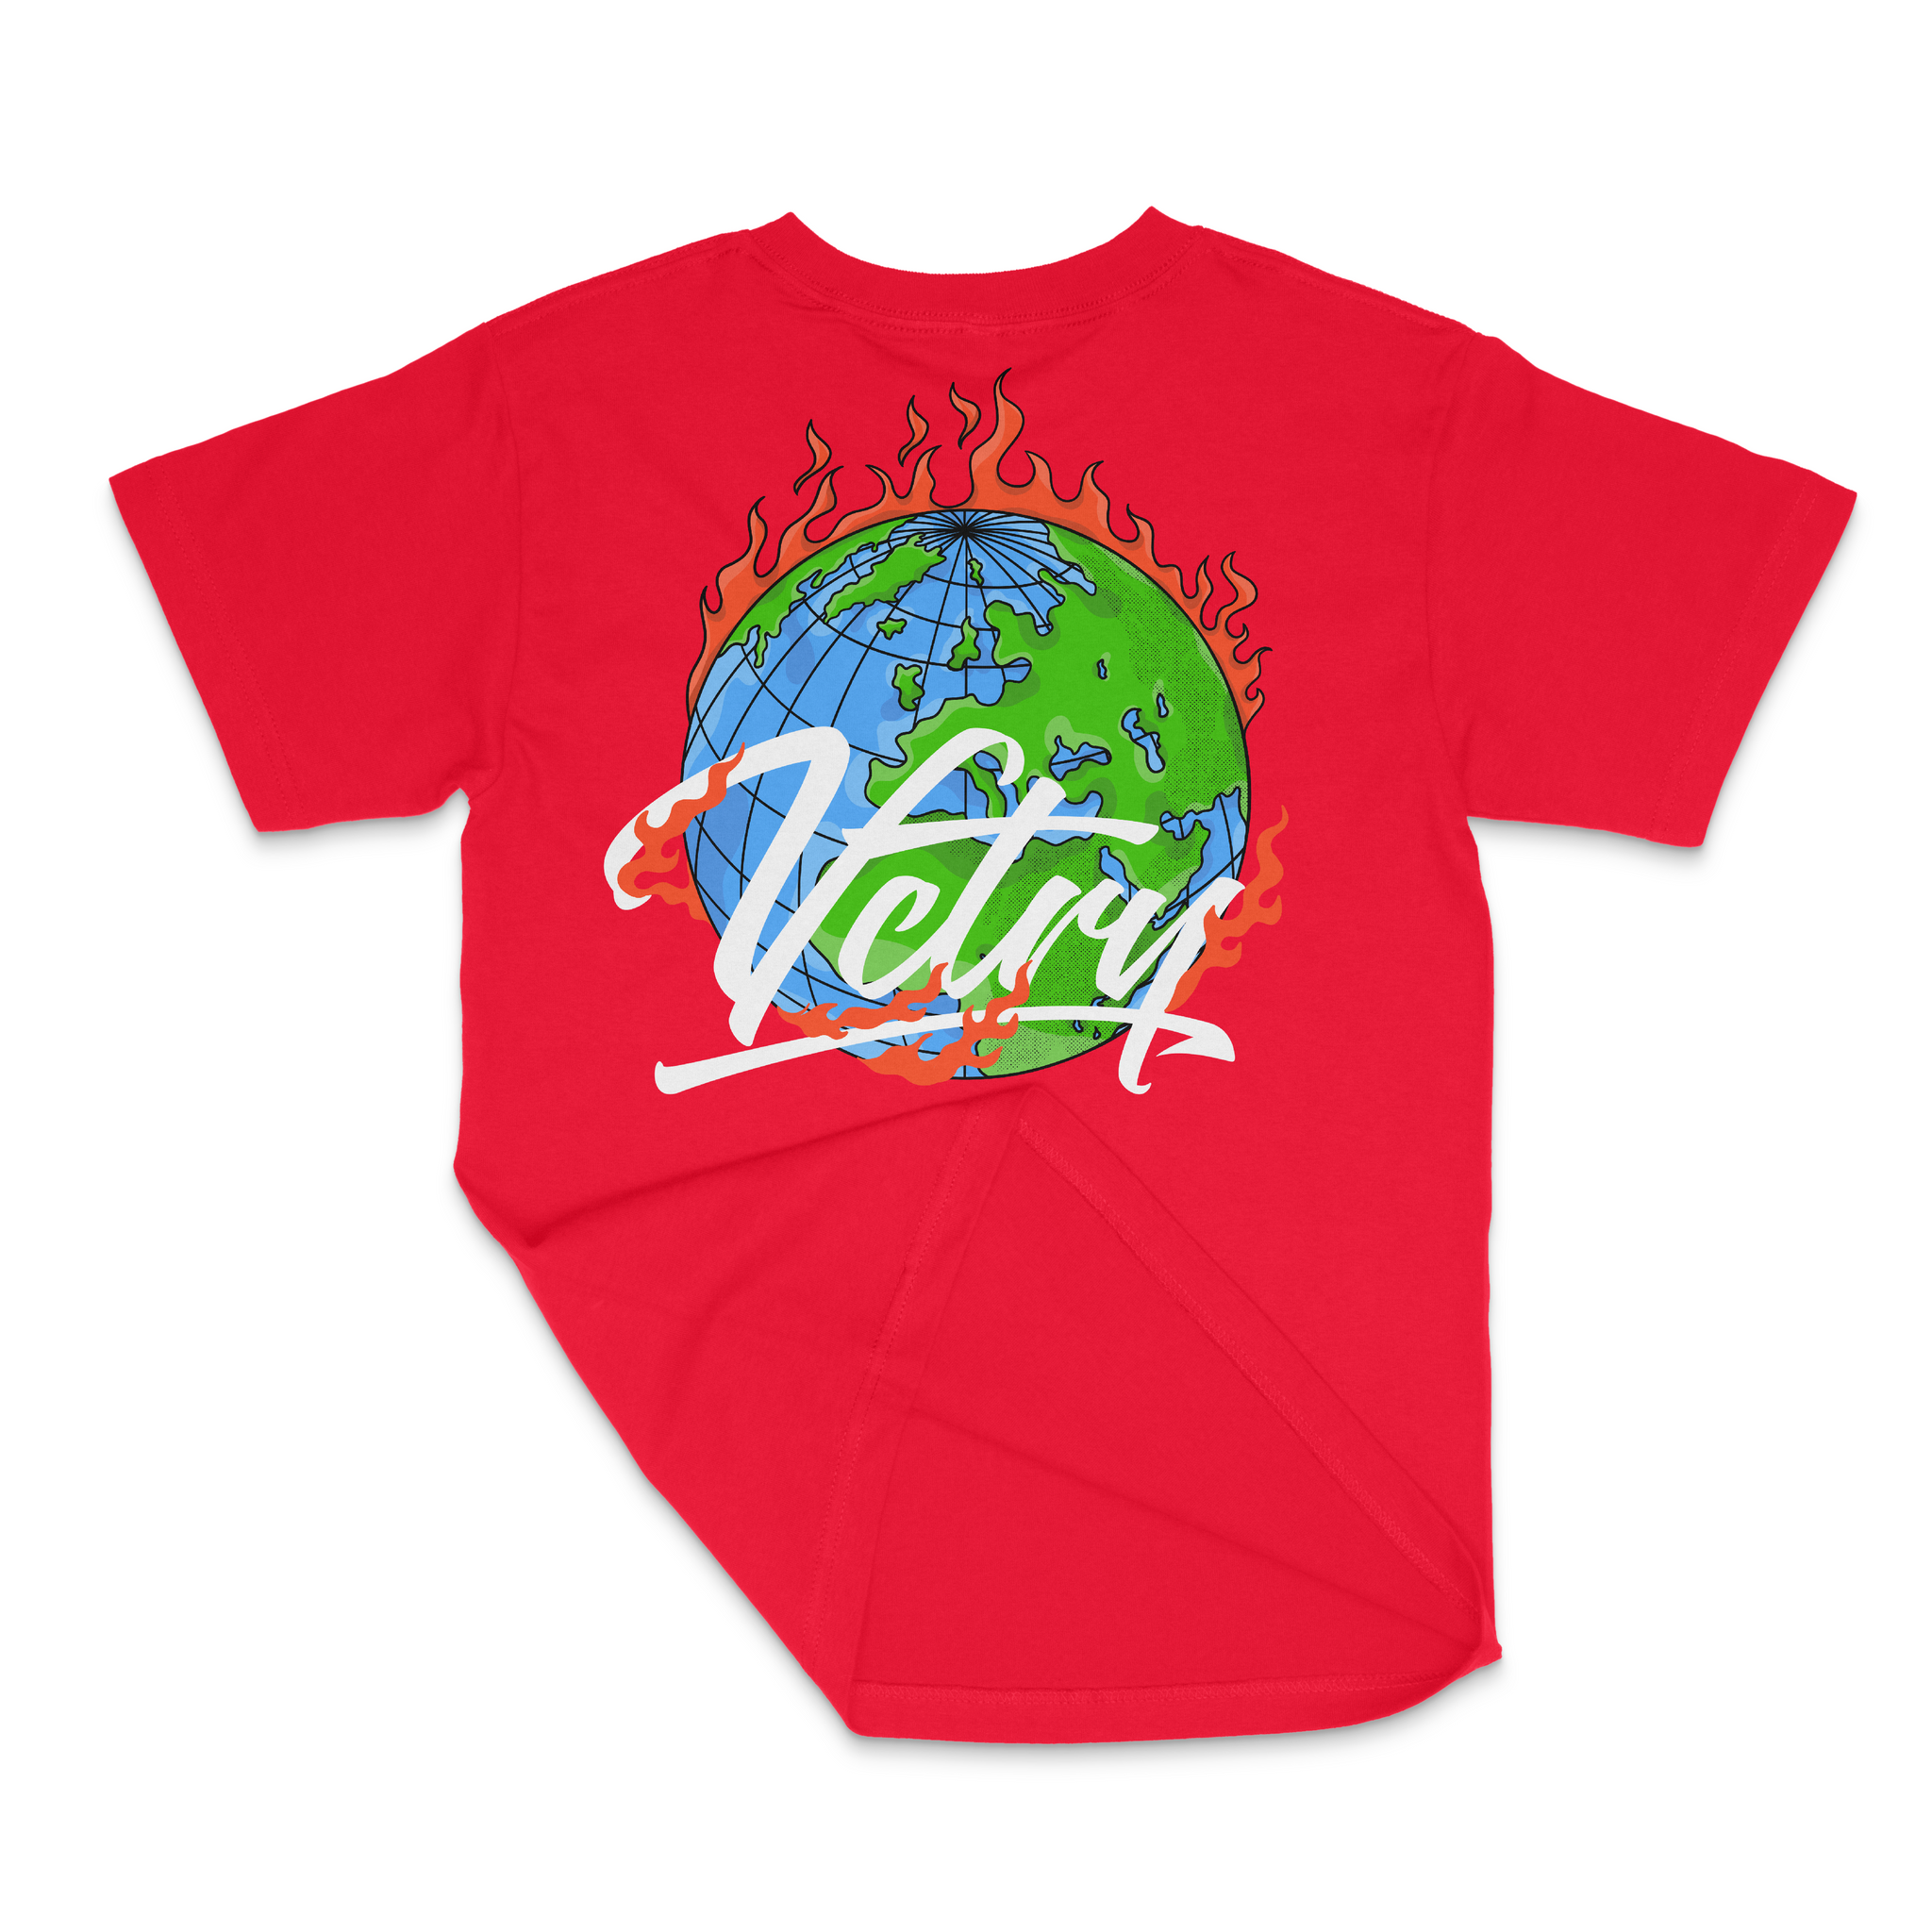 VCTRY World Tee